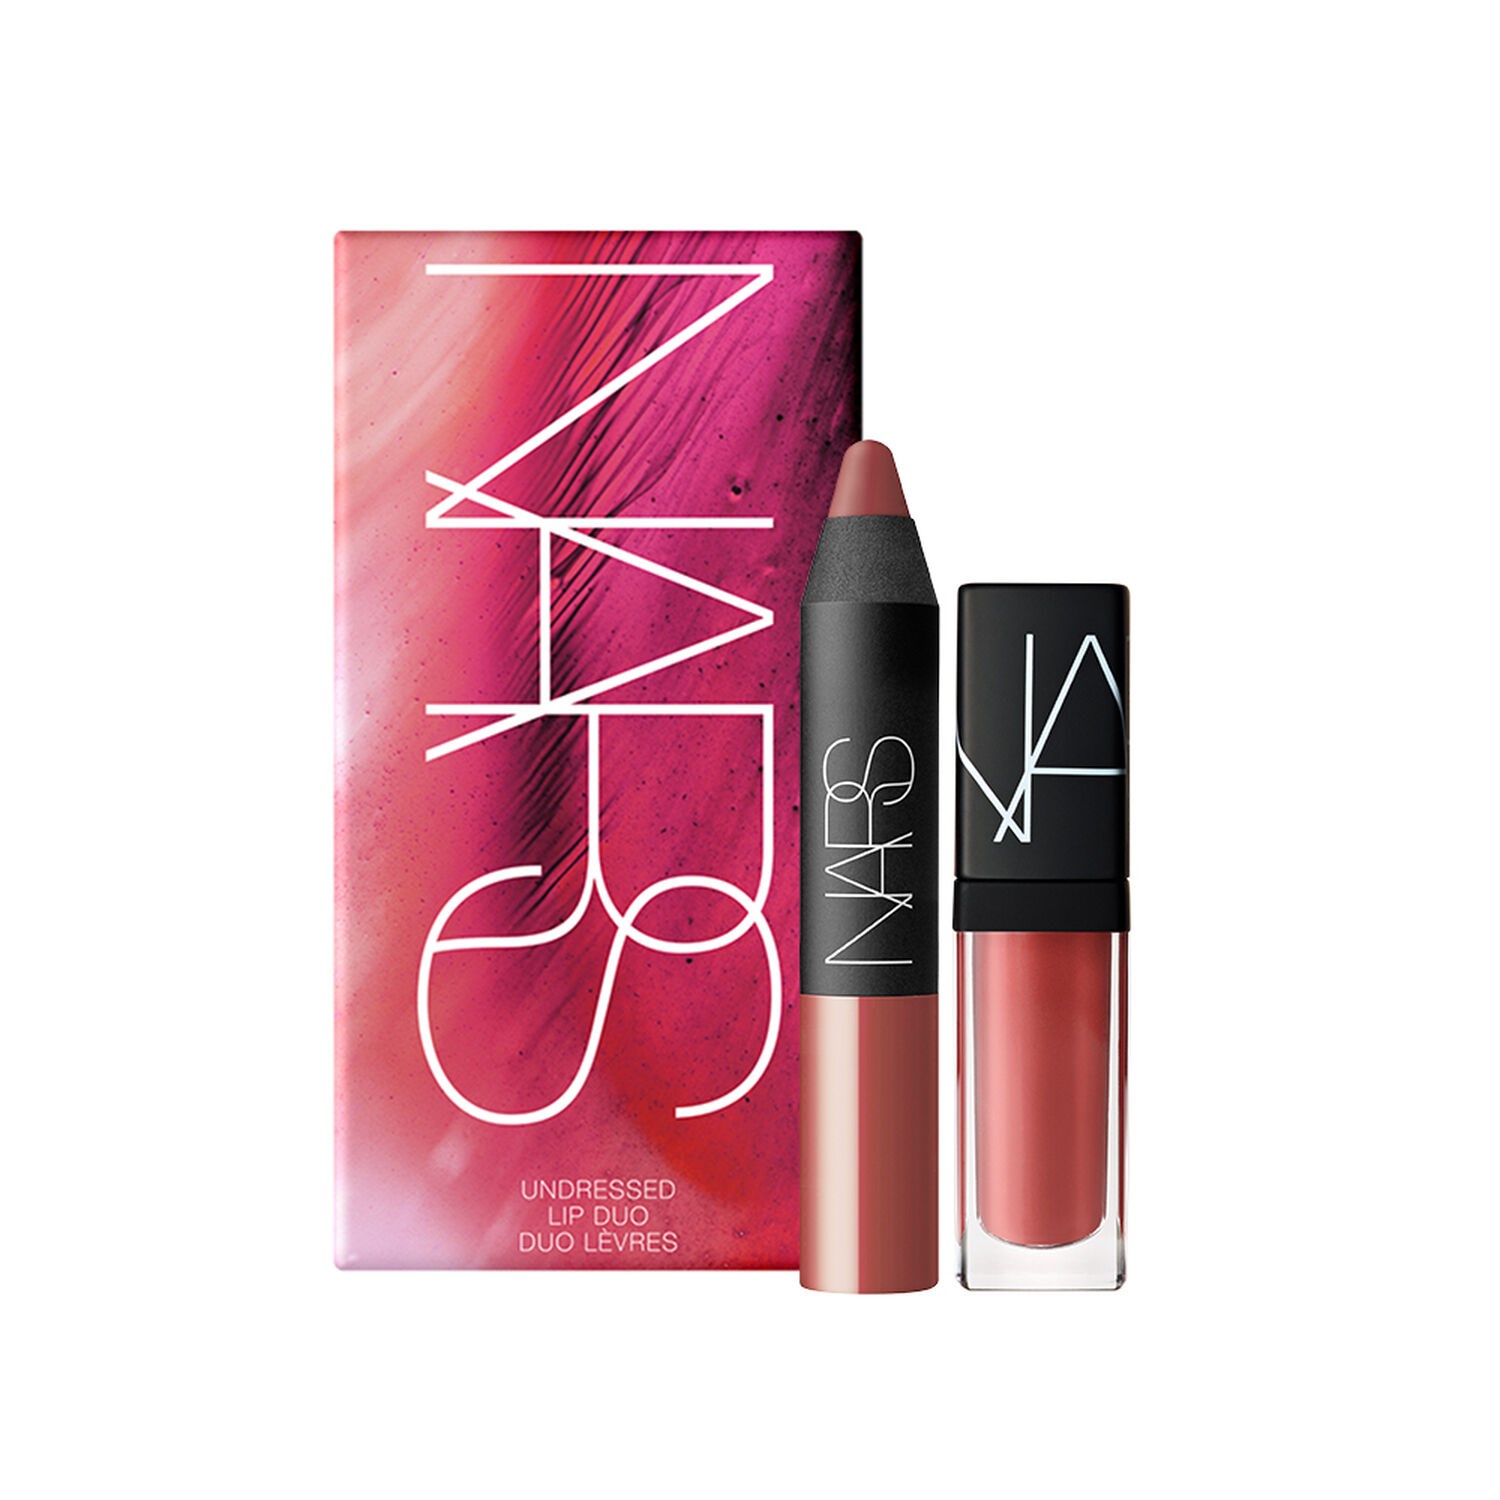 UNDRESSED LIP DUO WALKYRIE 1